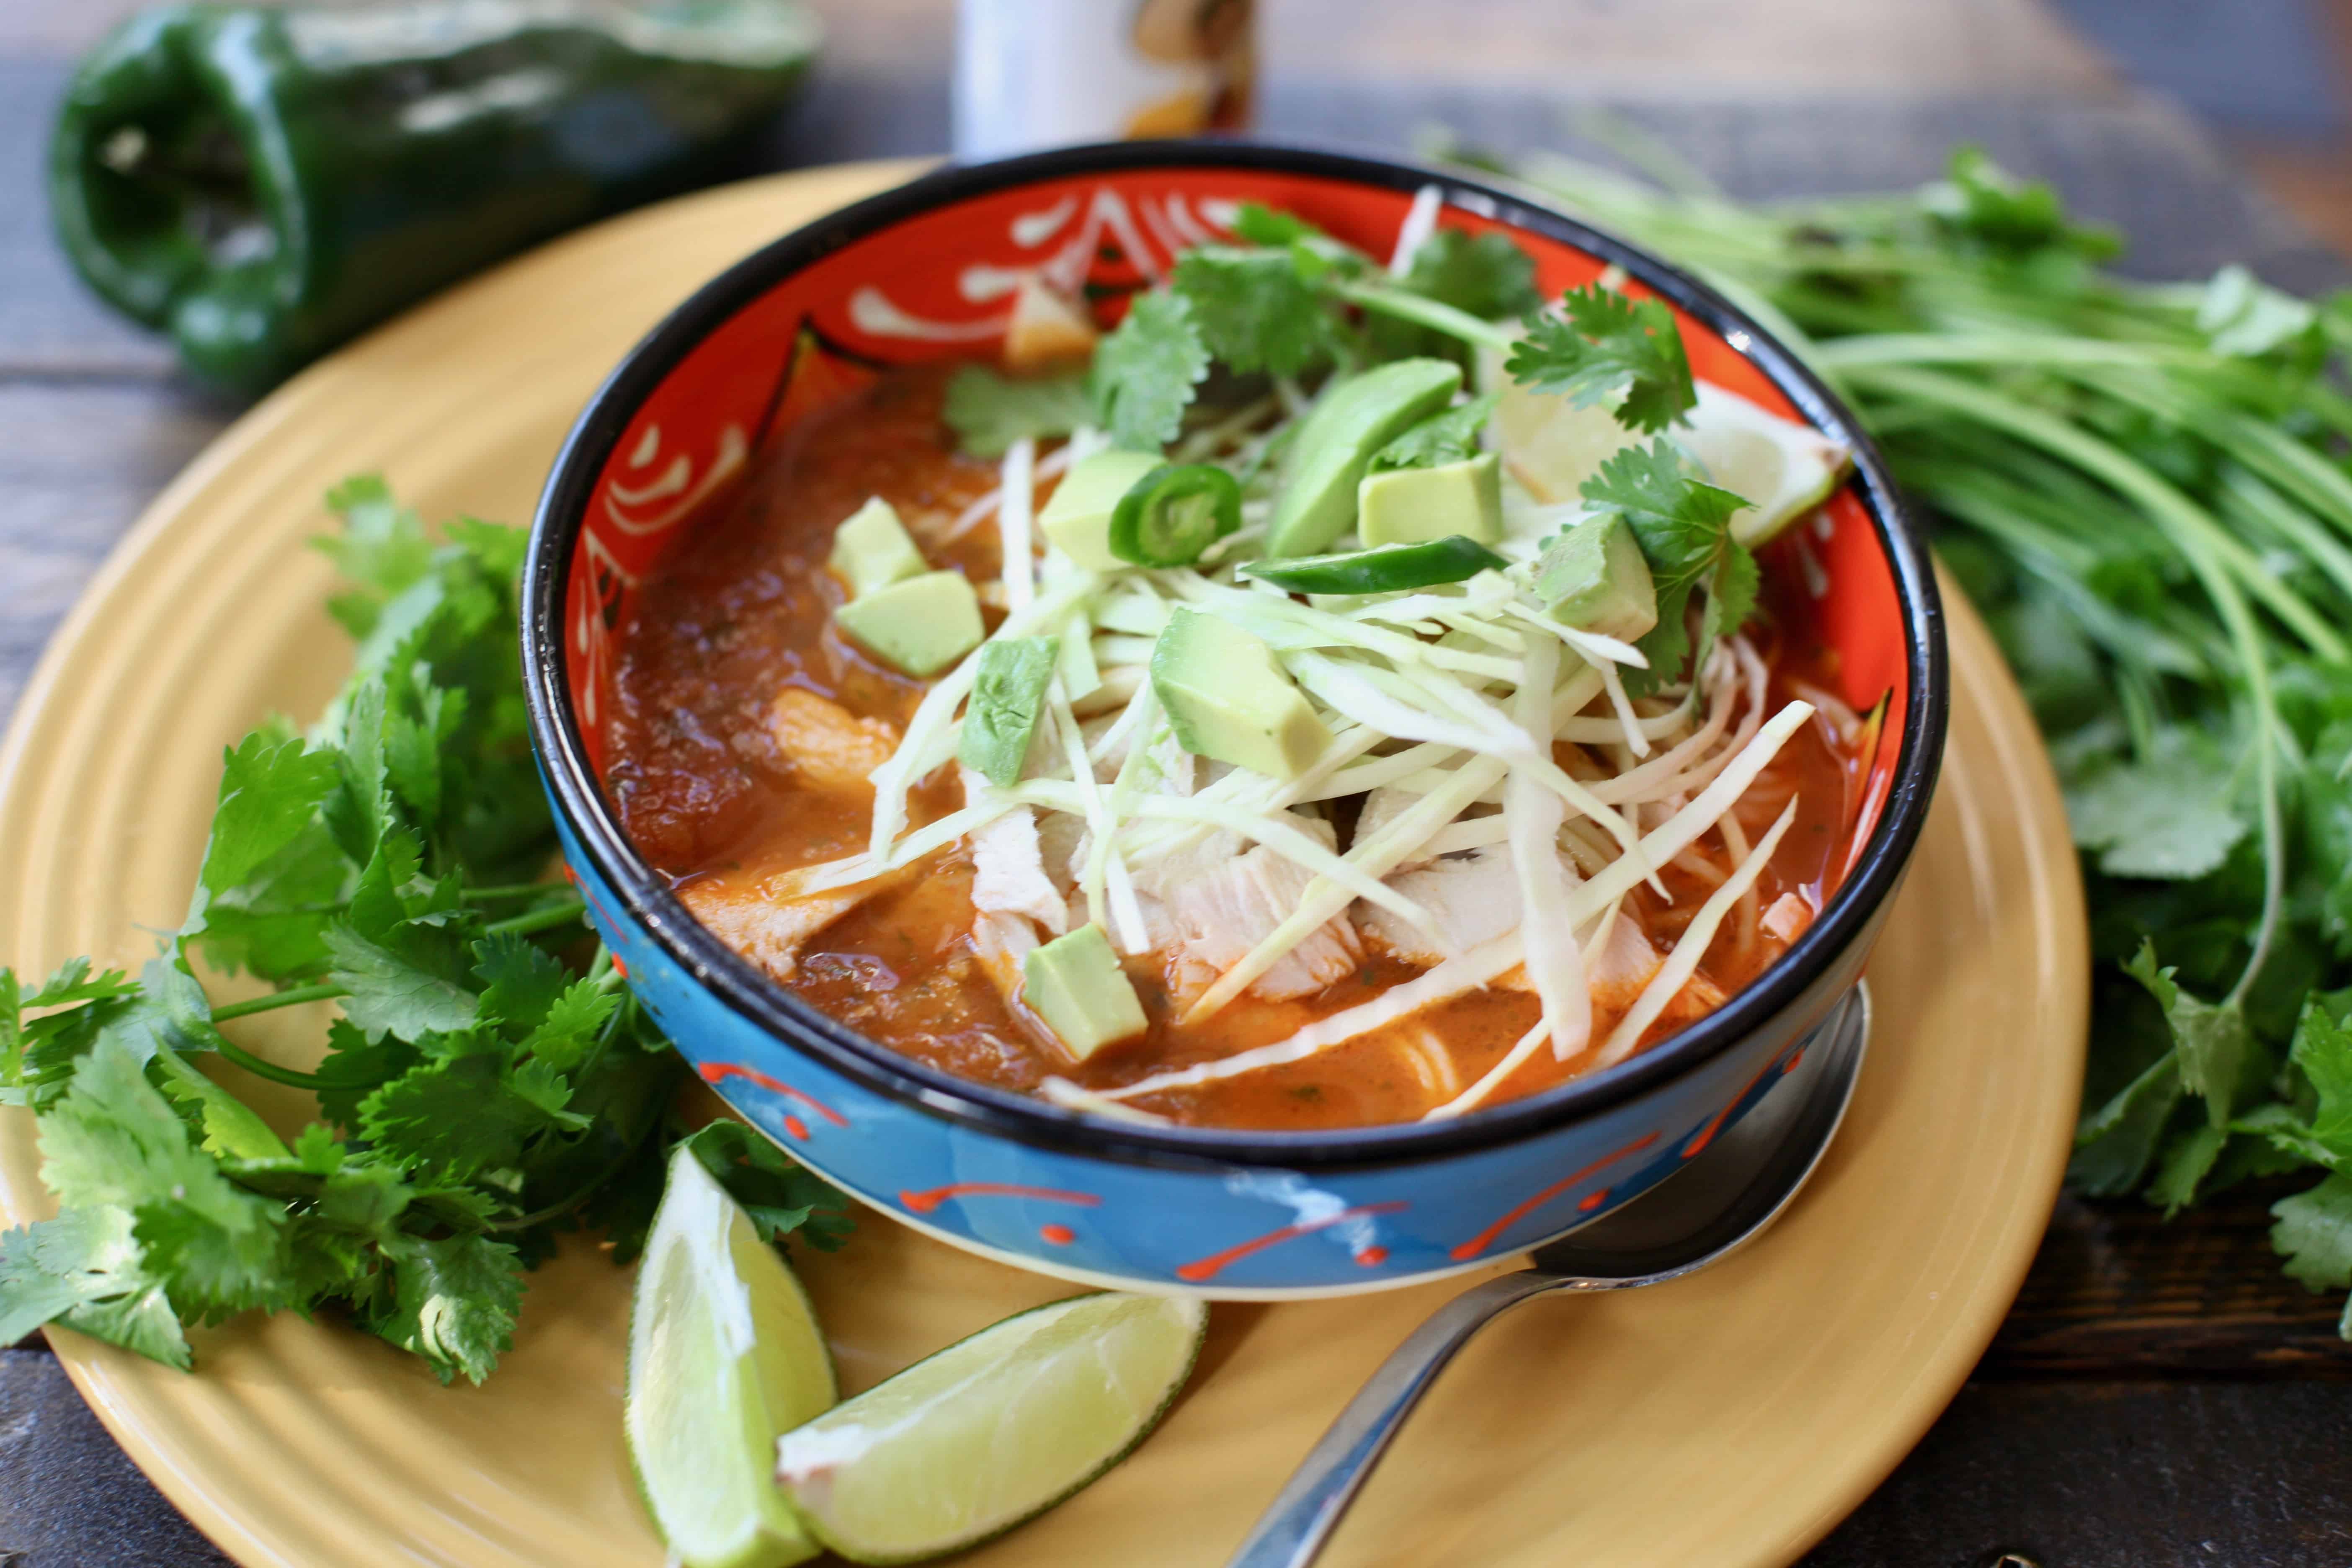 Spicy 'Mexican Style' Chicken Noodle Soup